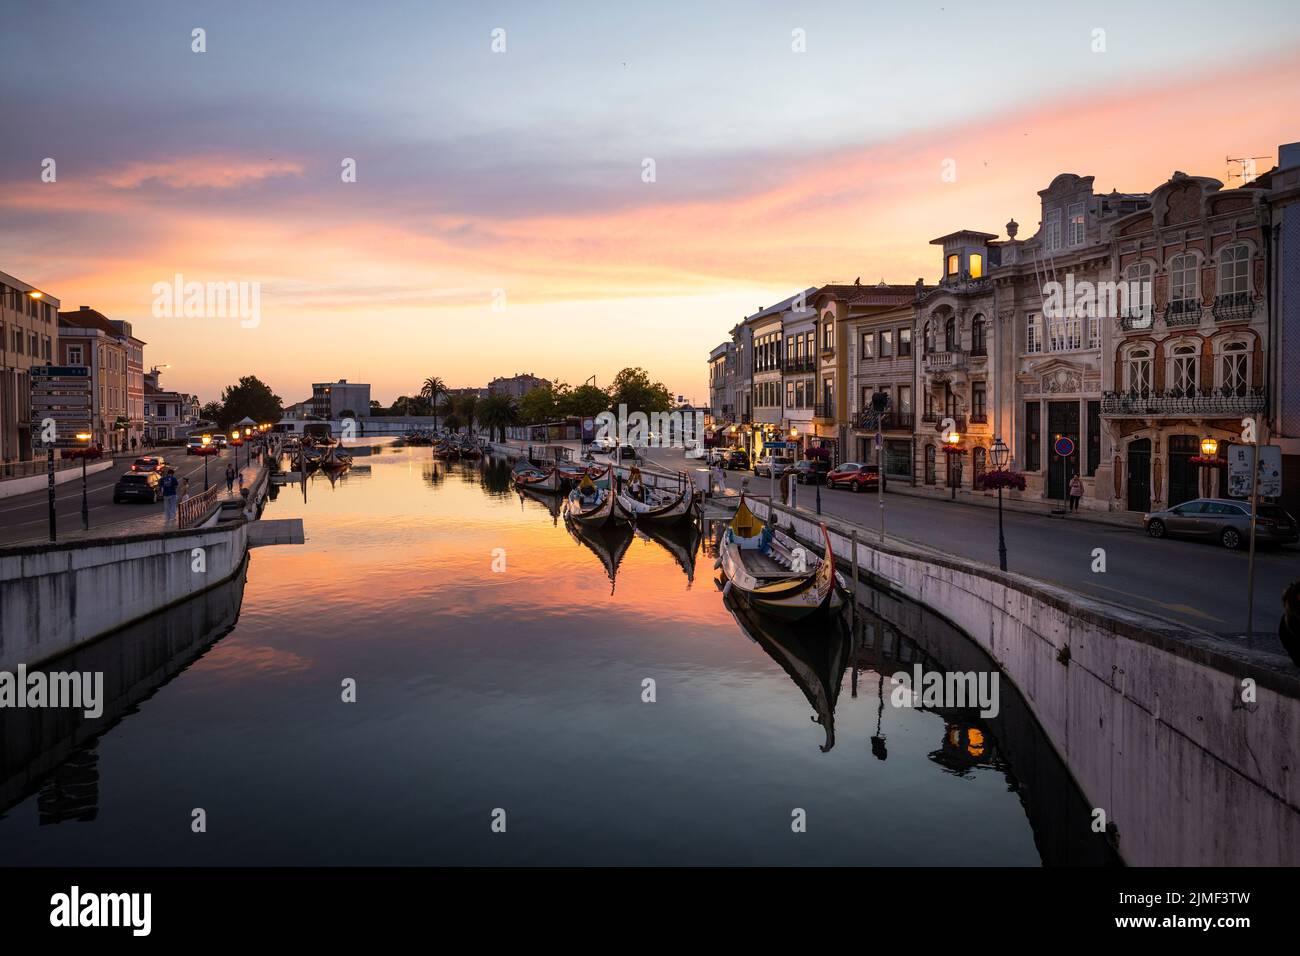 Aveiro, PORTUGAL - July 5, 2022: Boats at the Moliceiros Pier in Aveiro at blue hour. People on the pier and in the boats. Aveiro is called Portugals Stock Photo